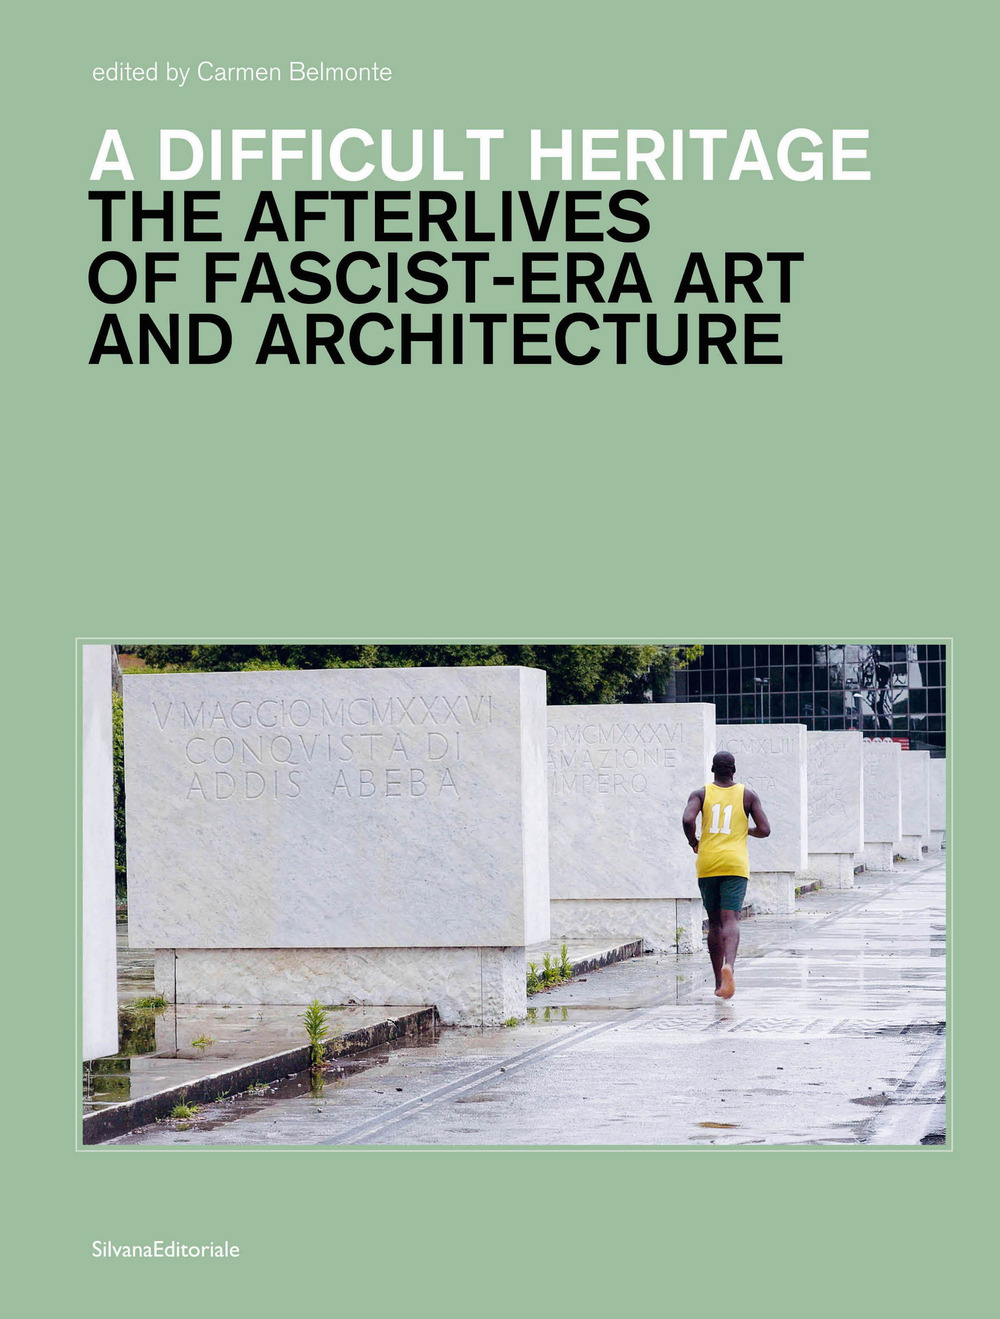 A difficult heritage. The afterlives of fascist-era art and architecture